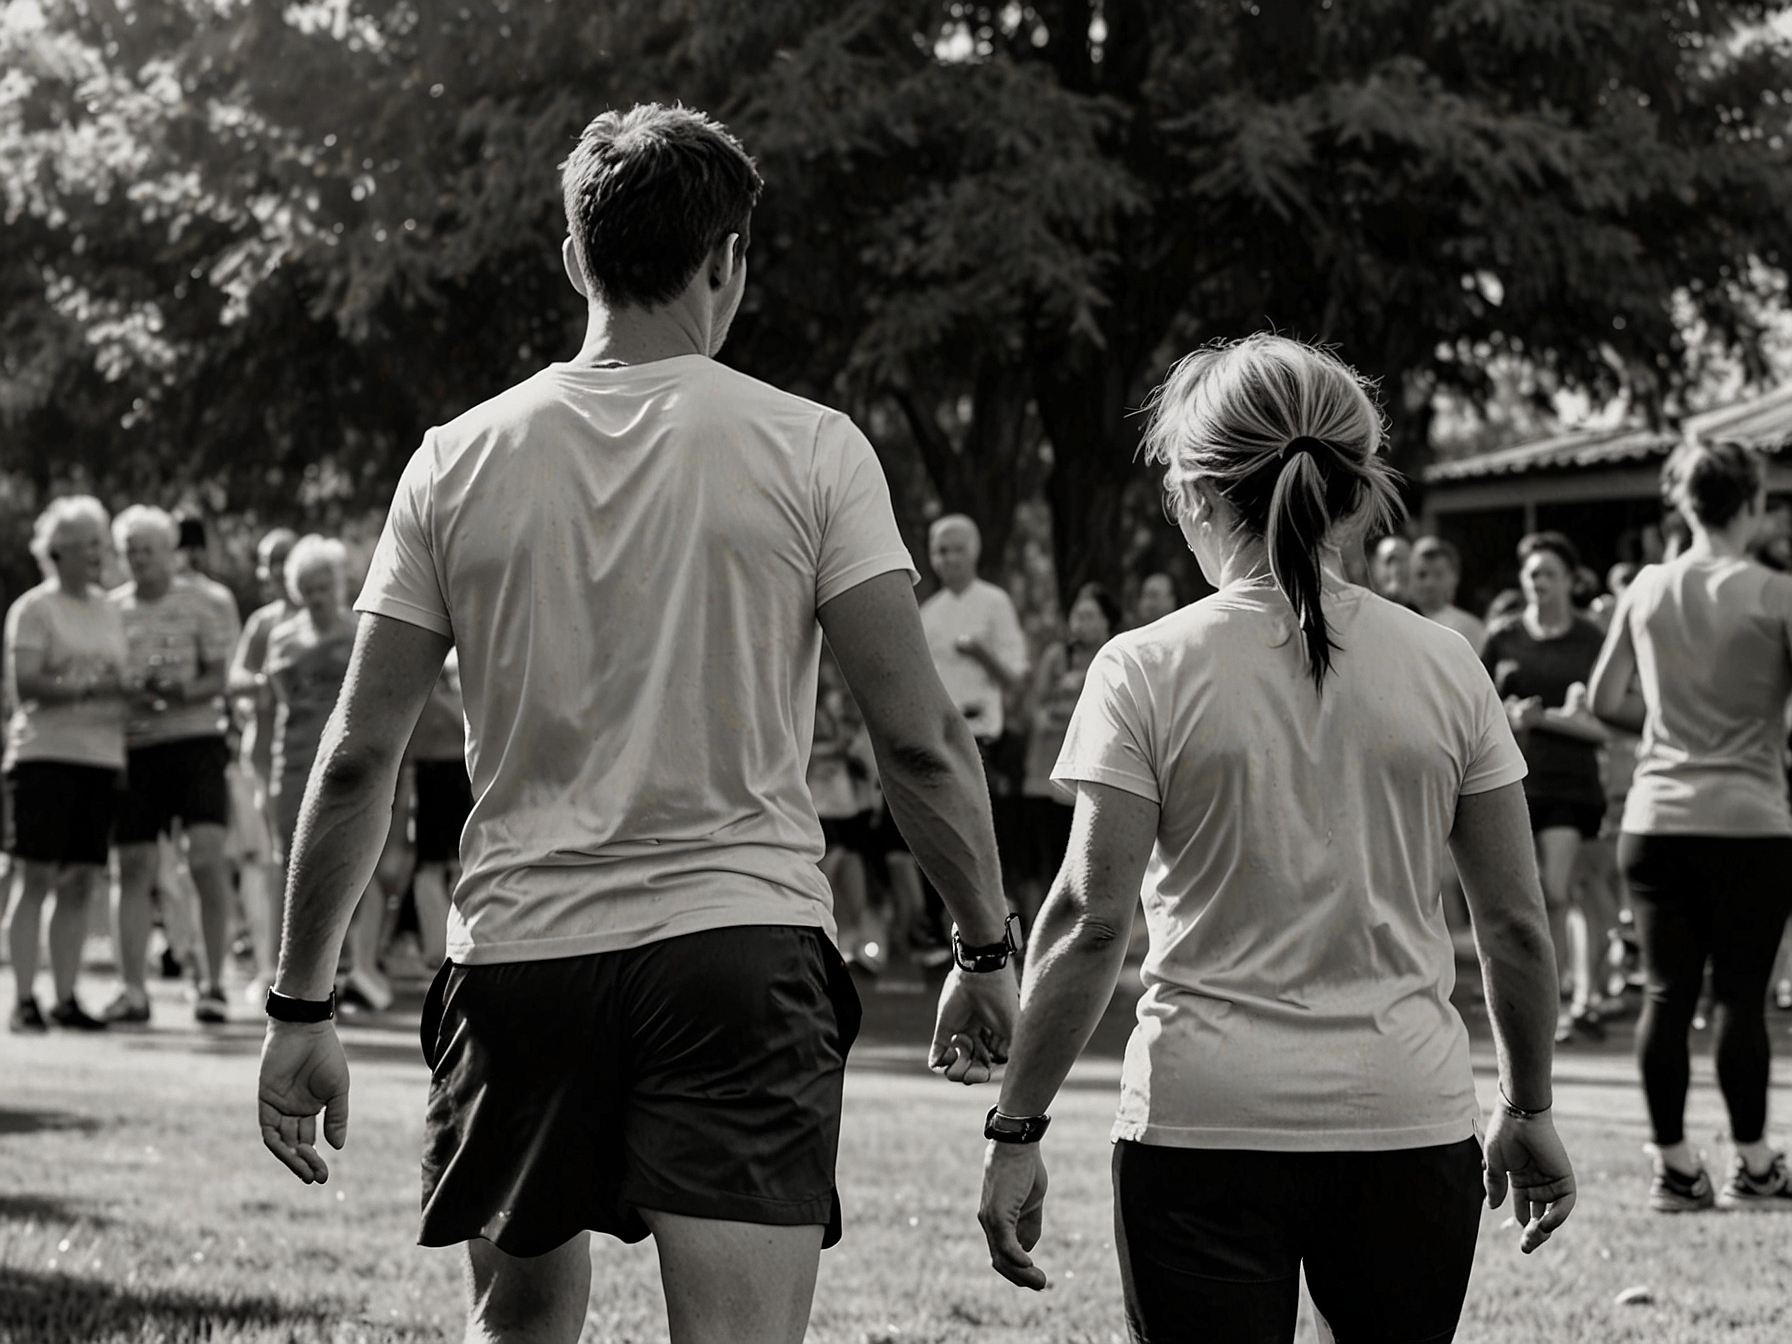 An emotional reunion scene among family members, captured during a special Parkrun gathering, symbolizing the profound impact of community events in rekindling lost relationships.